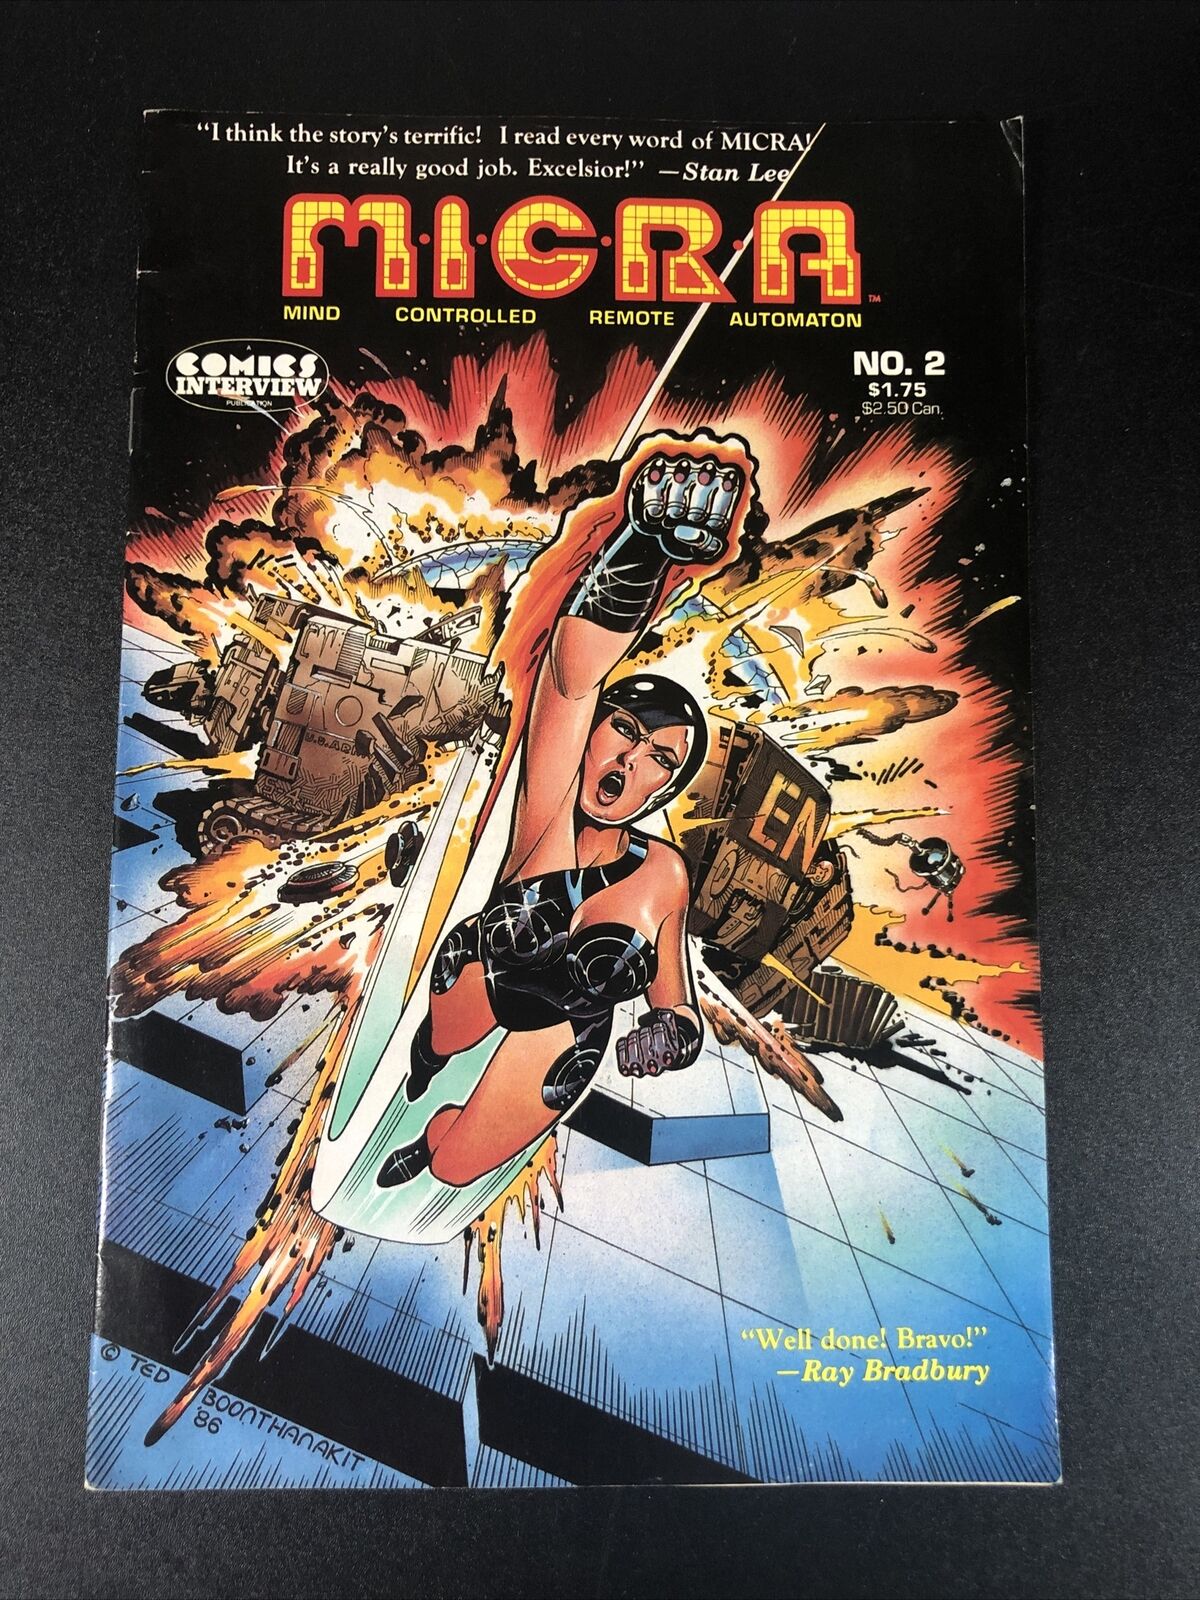 MICRA #2 Mind Controlled Remote Automation 1987 Comic Elfquest Space Ark on back